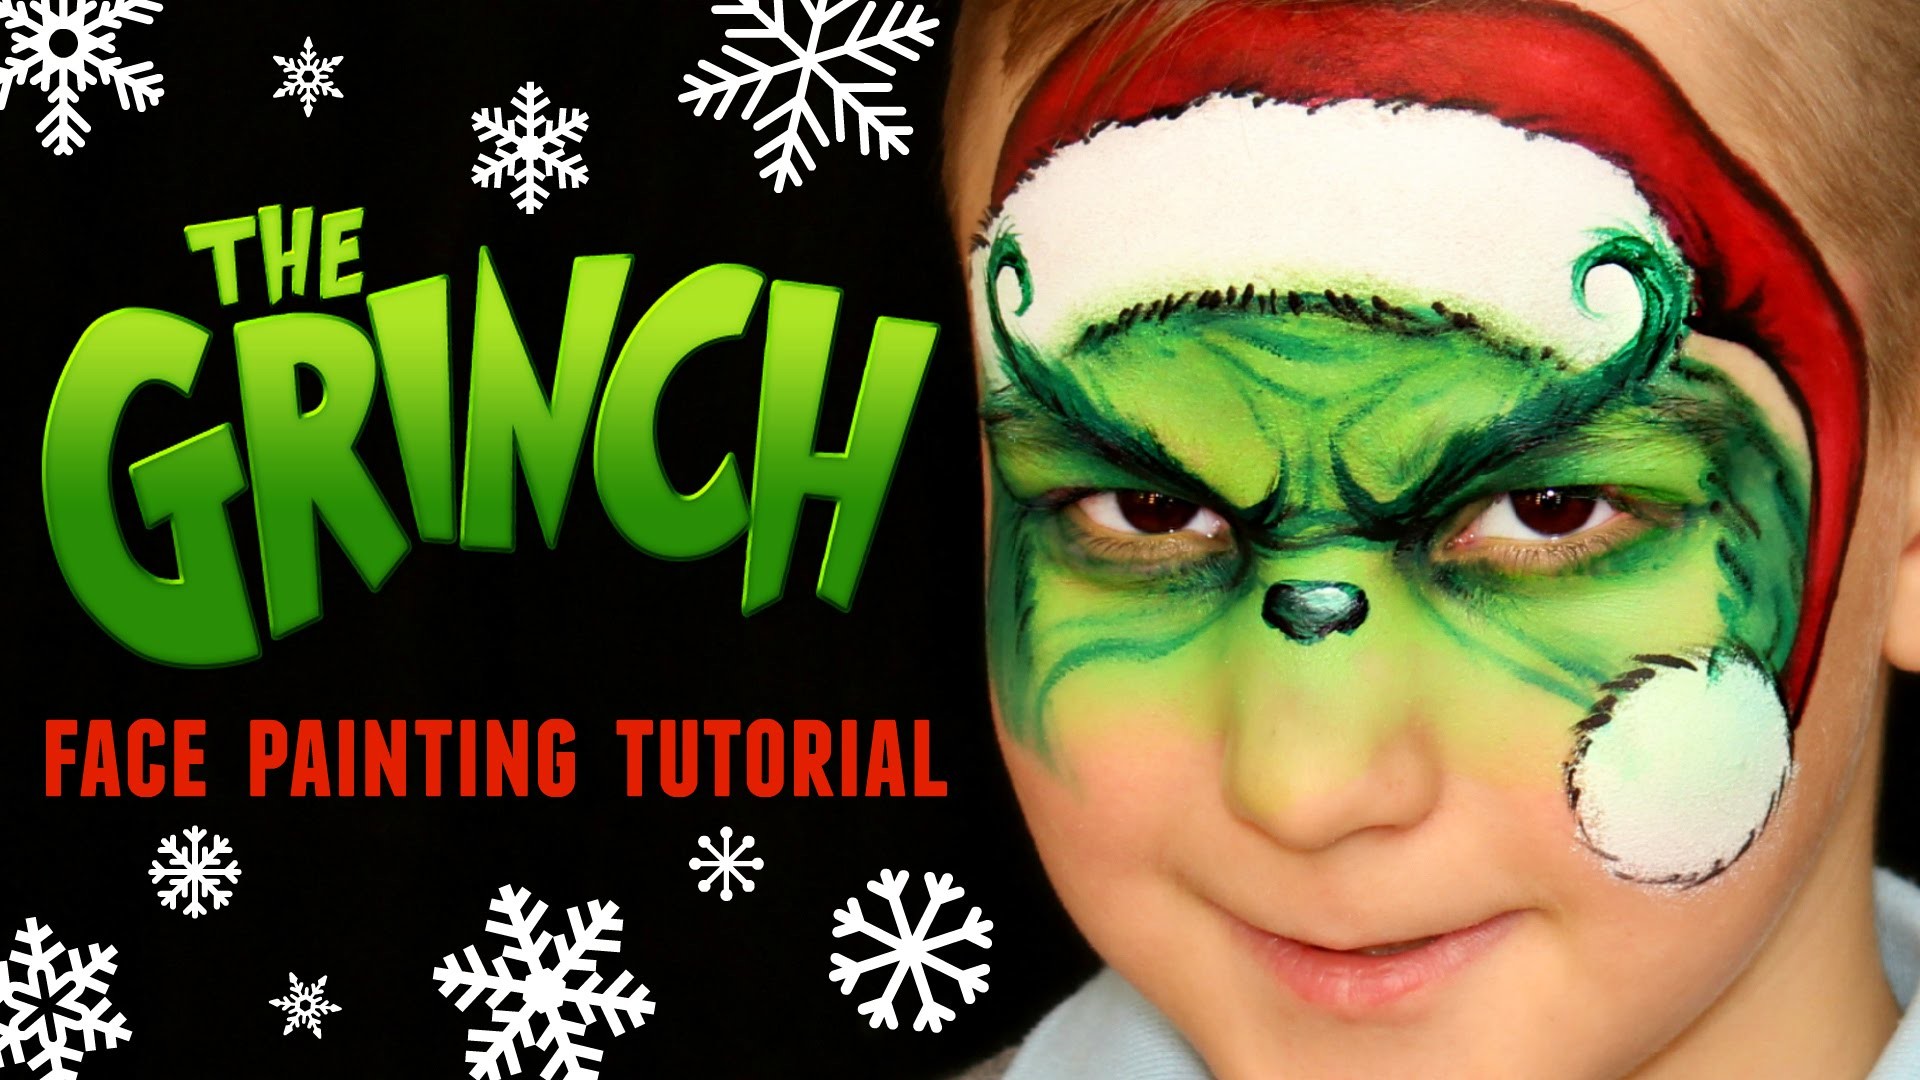 The Grinch - Christmas Face Painting & Makeup Tutorial.